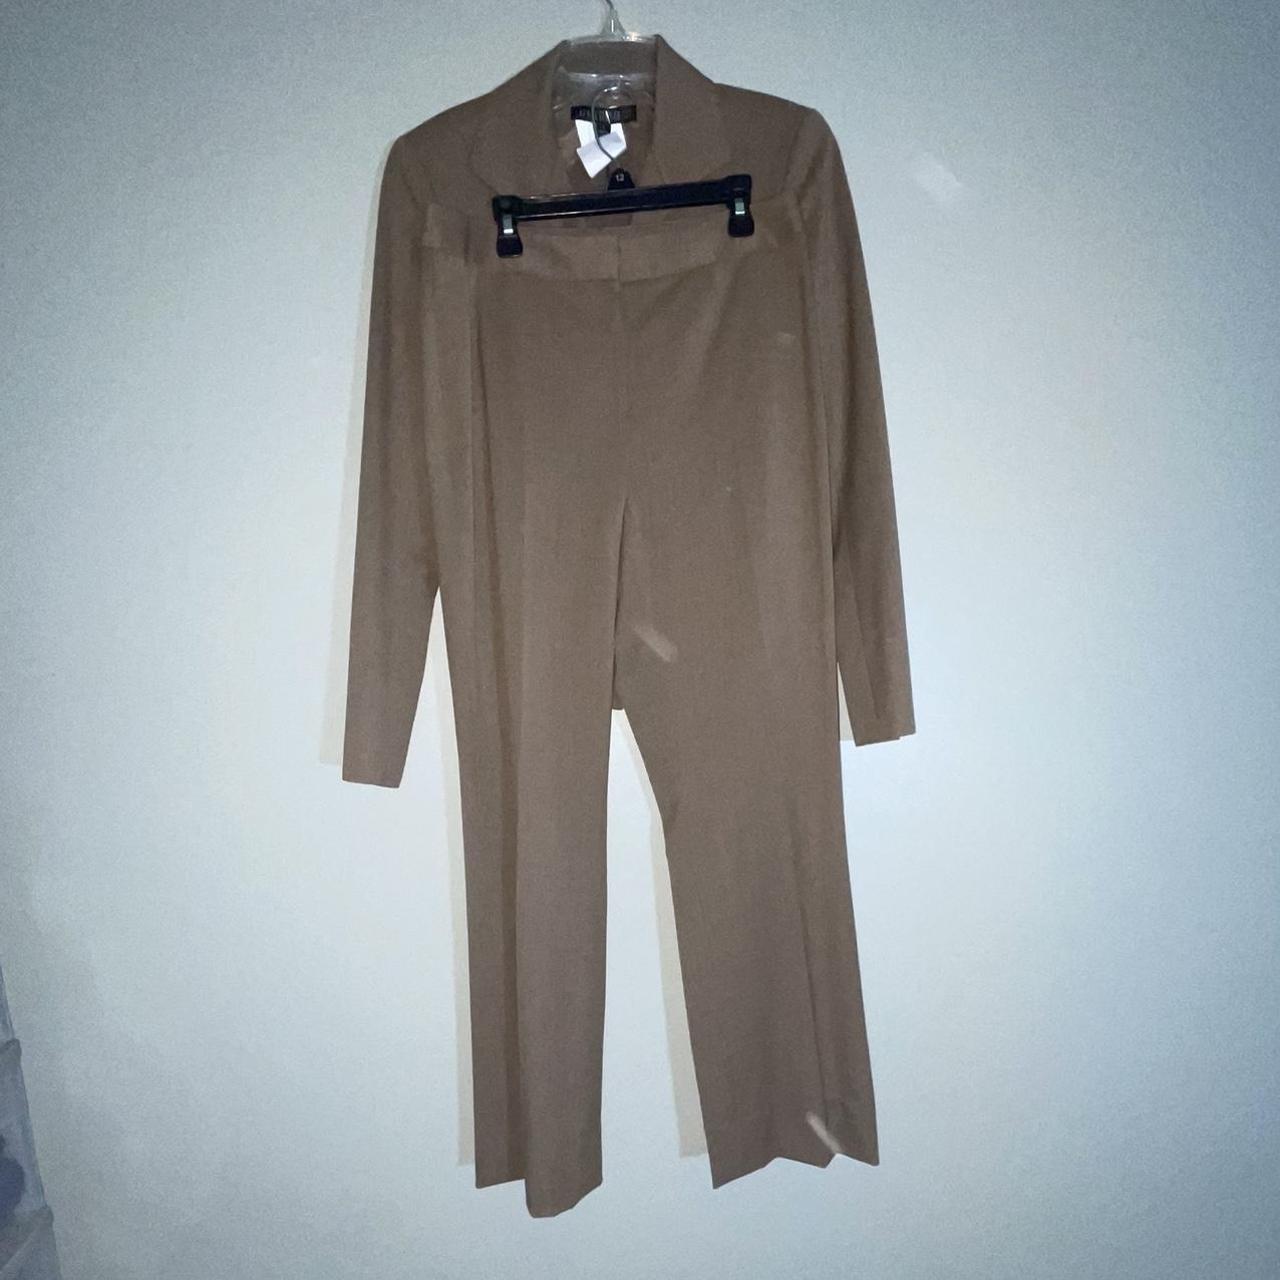 Super comfy and cute tan pantsuit made by Lafayette - Depop